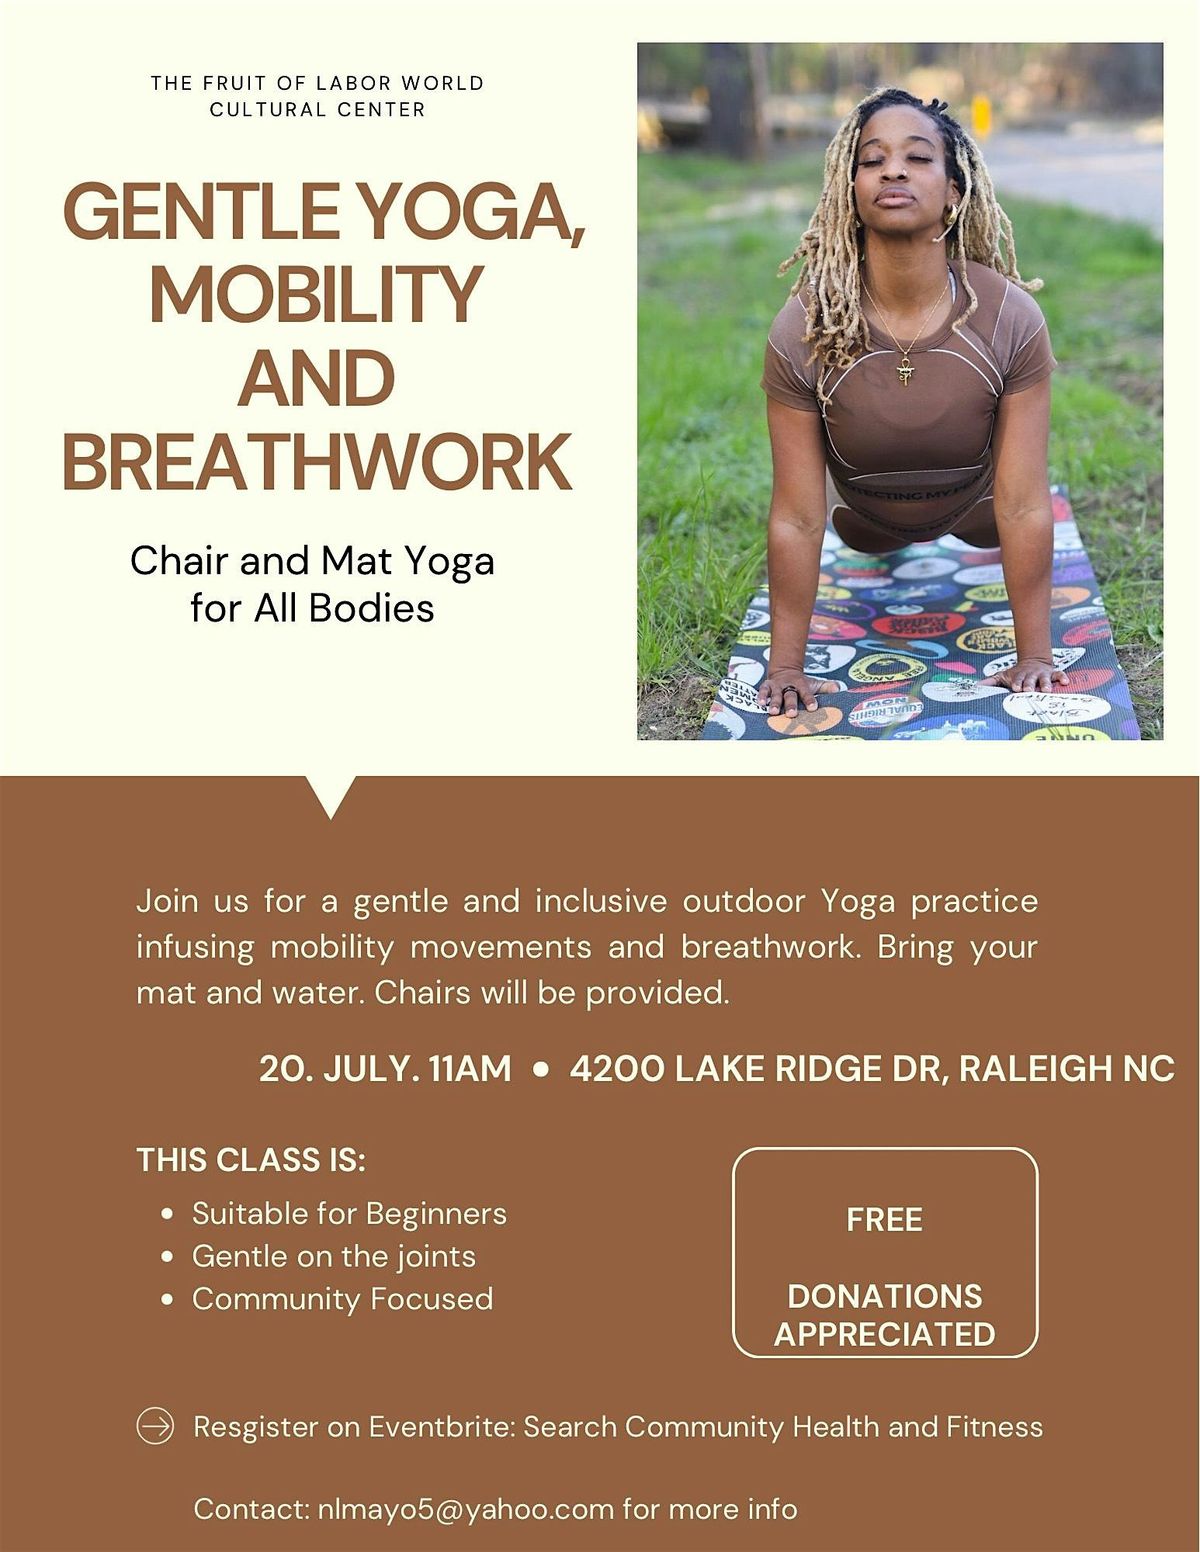 Yoga that's Suitable for All, Gentle on the Joints & Community Focused